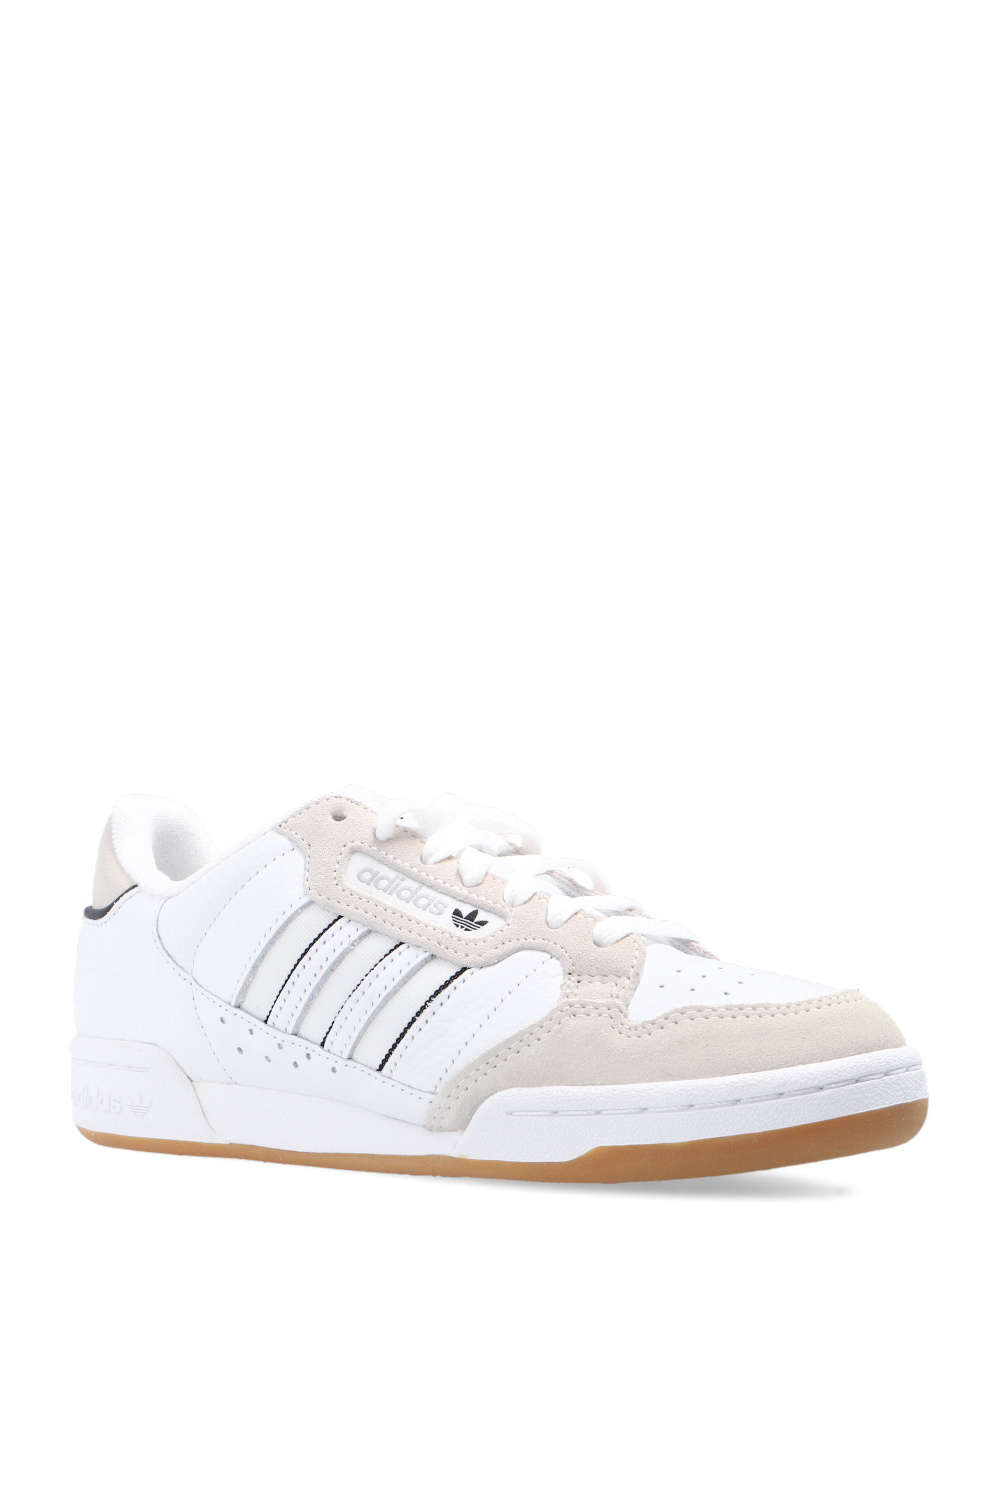 | | champion adidas Women\'s | boost xr_1 x white IetpShops ADIDAS sneakers \'Continental Shoes Originals 80 Stripes\' nmd